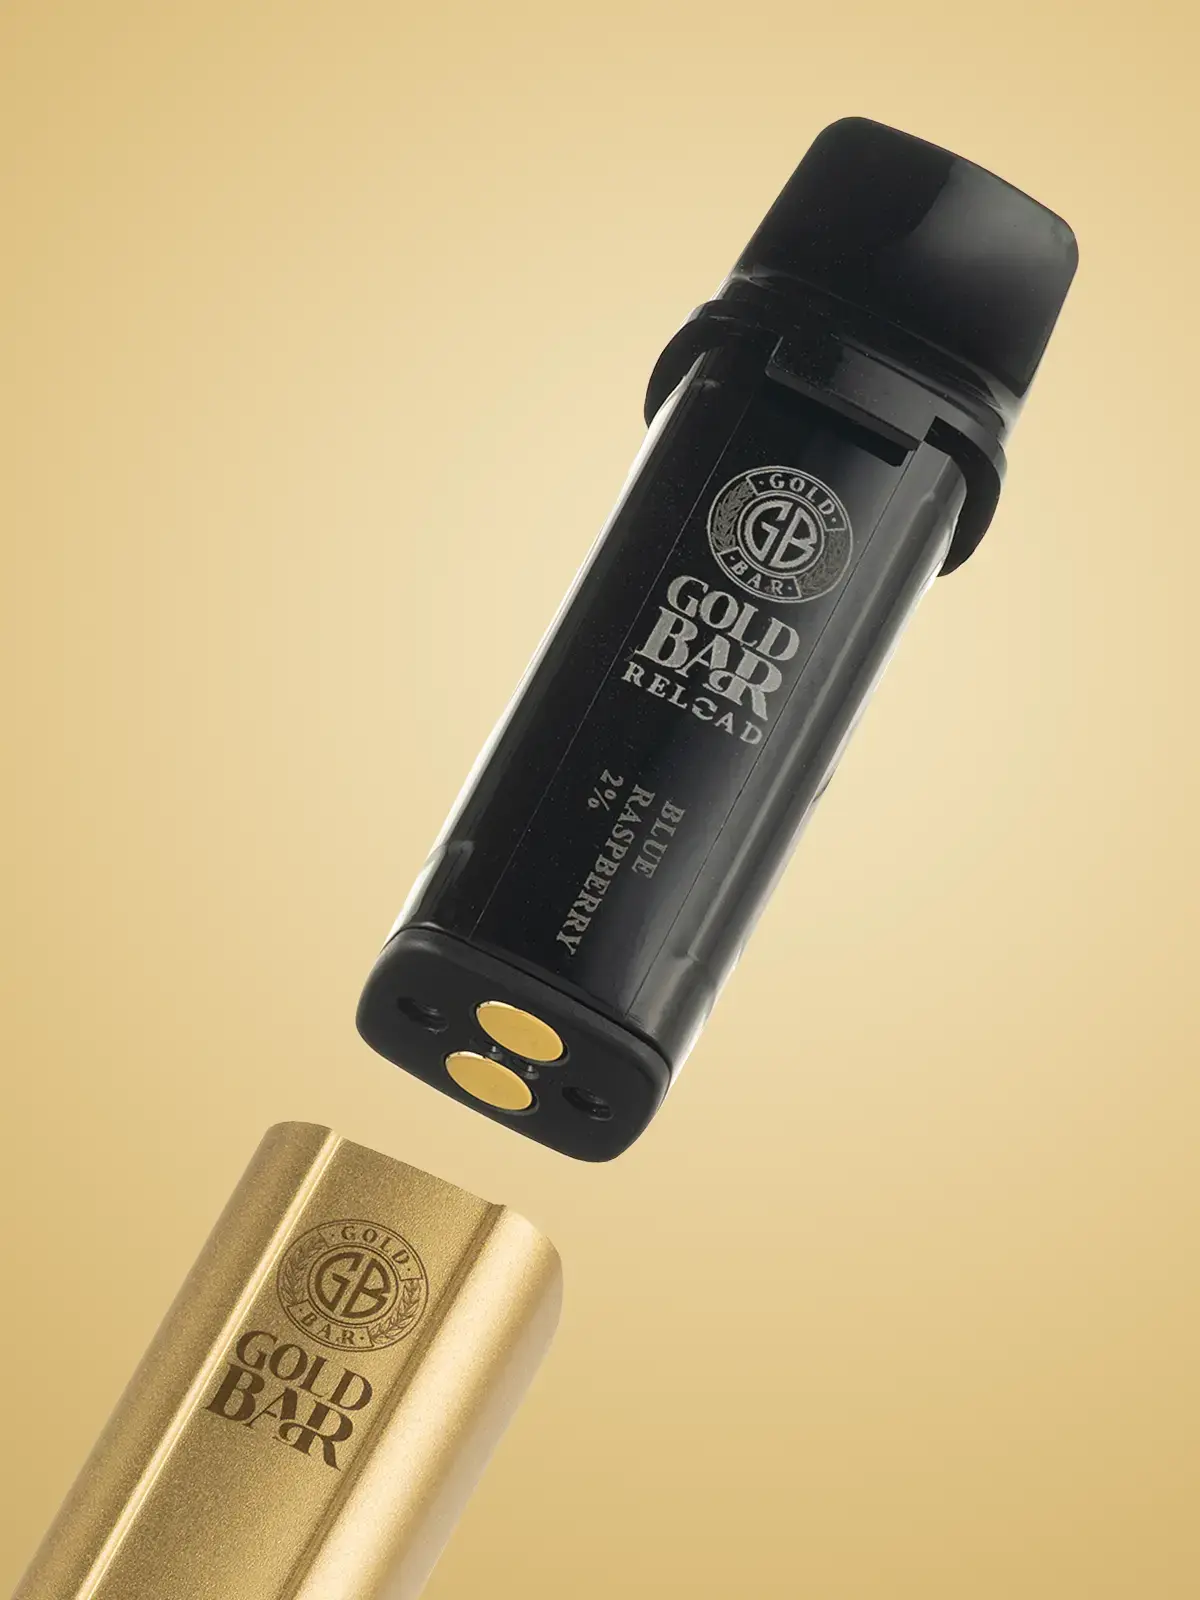 A Gold Bar Reload vape showing its pod coming out from the top